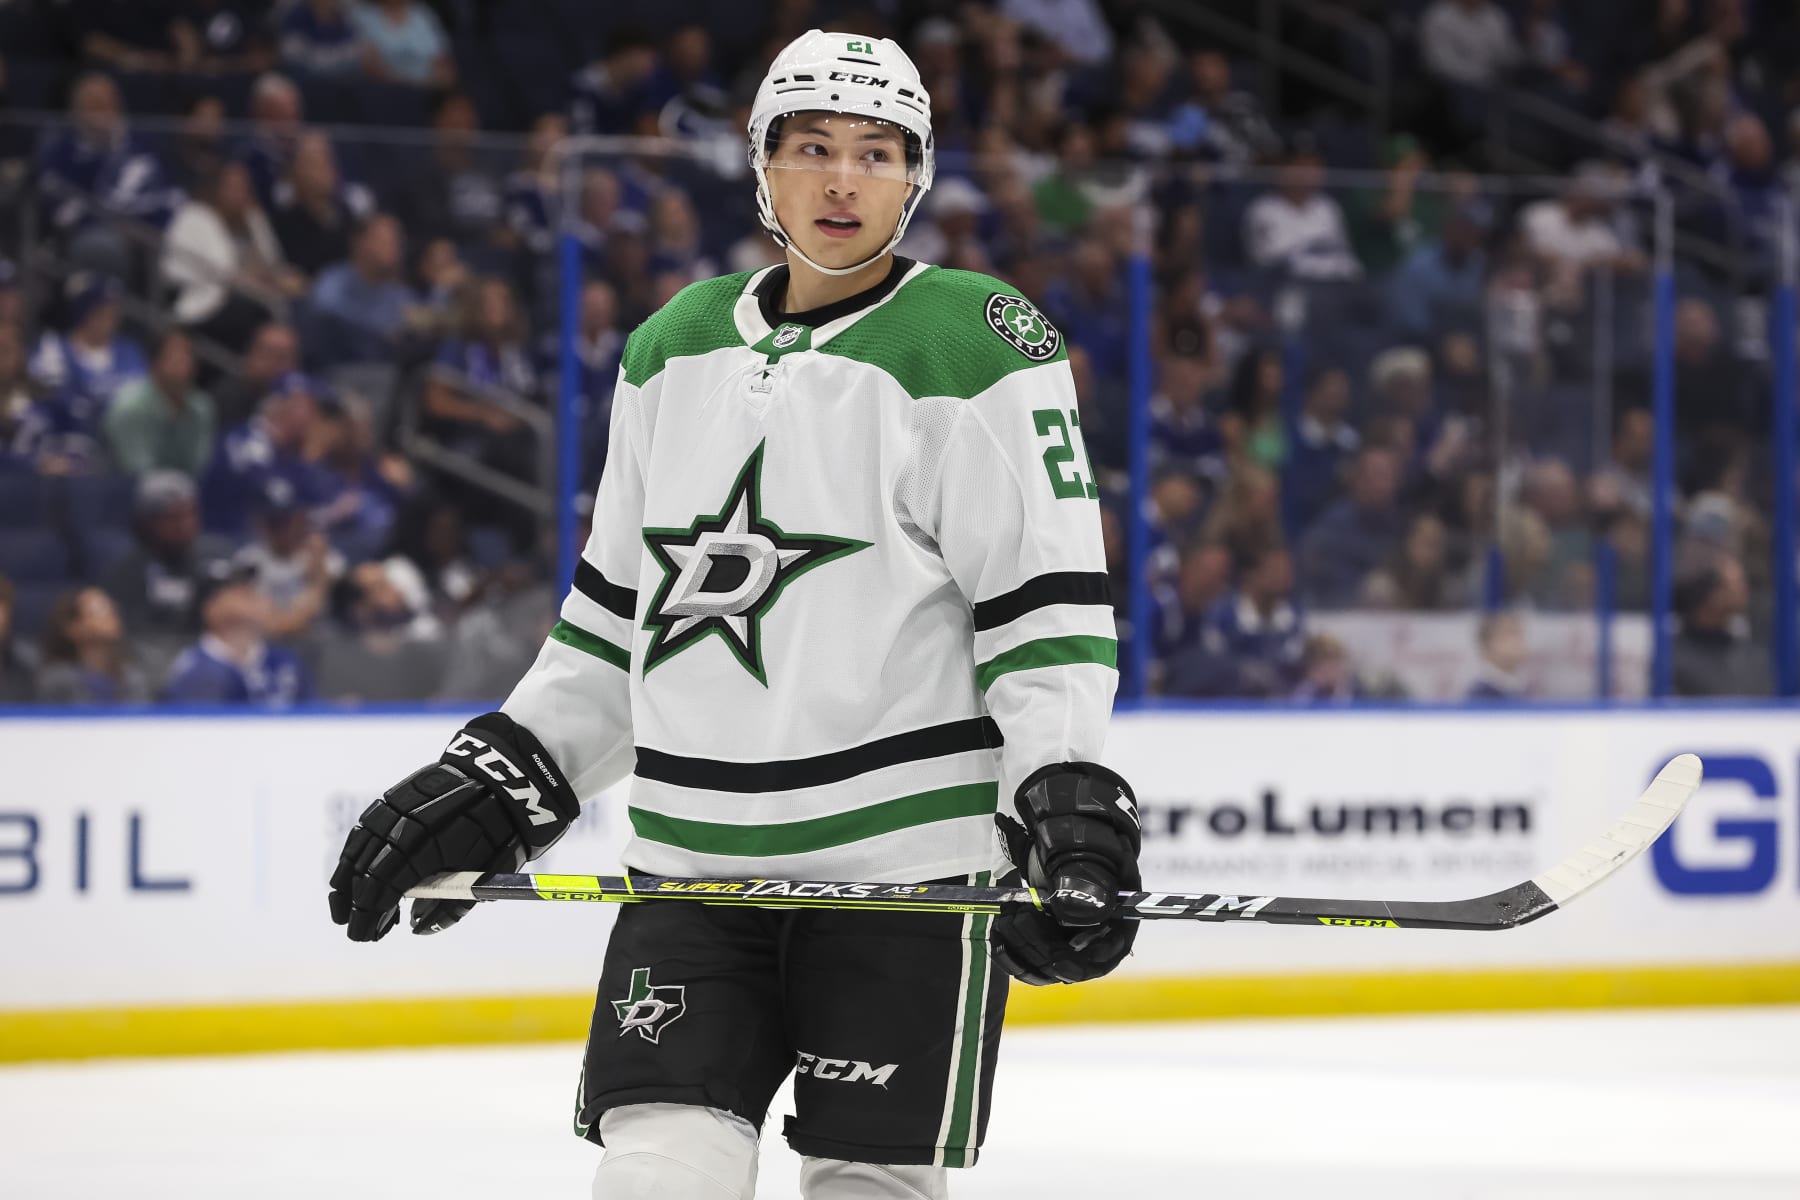 Top 3 Reasons to Get Excited for the 2023 NHL All-Star Game